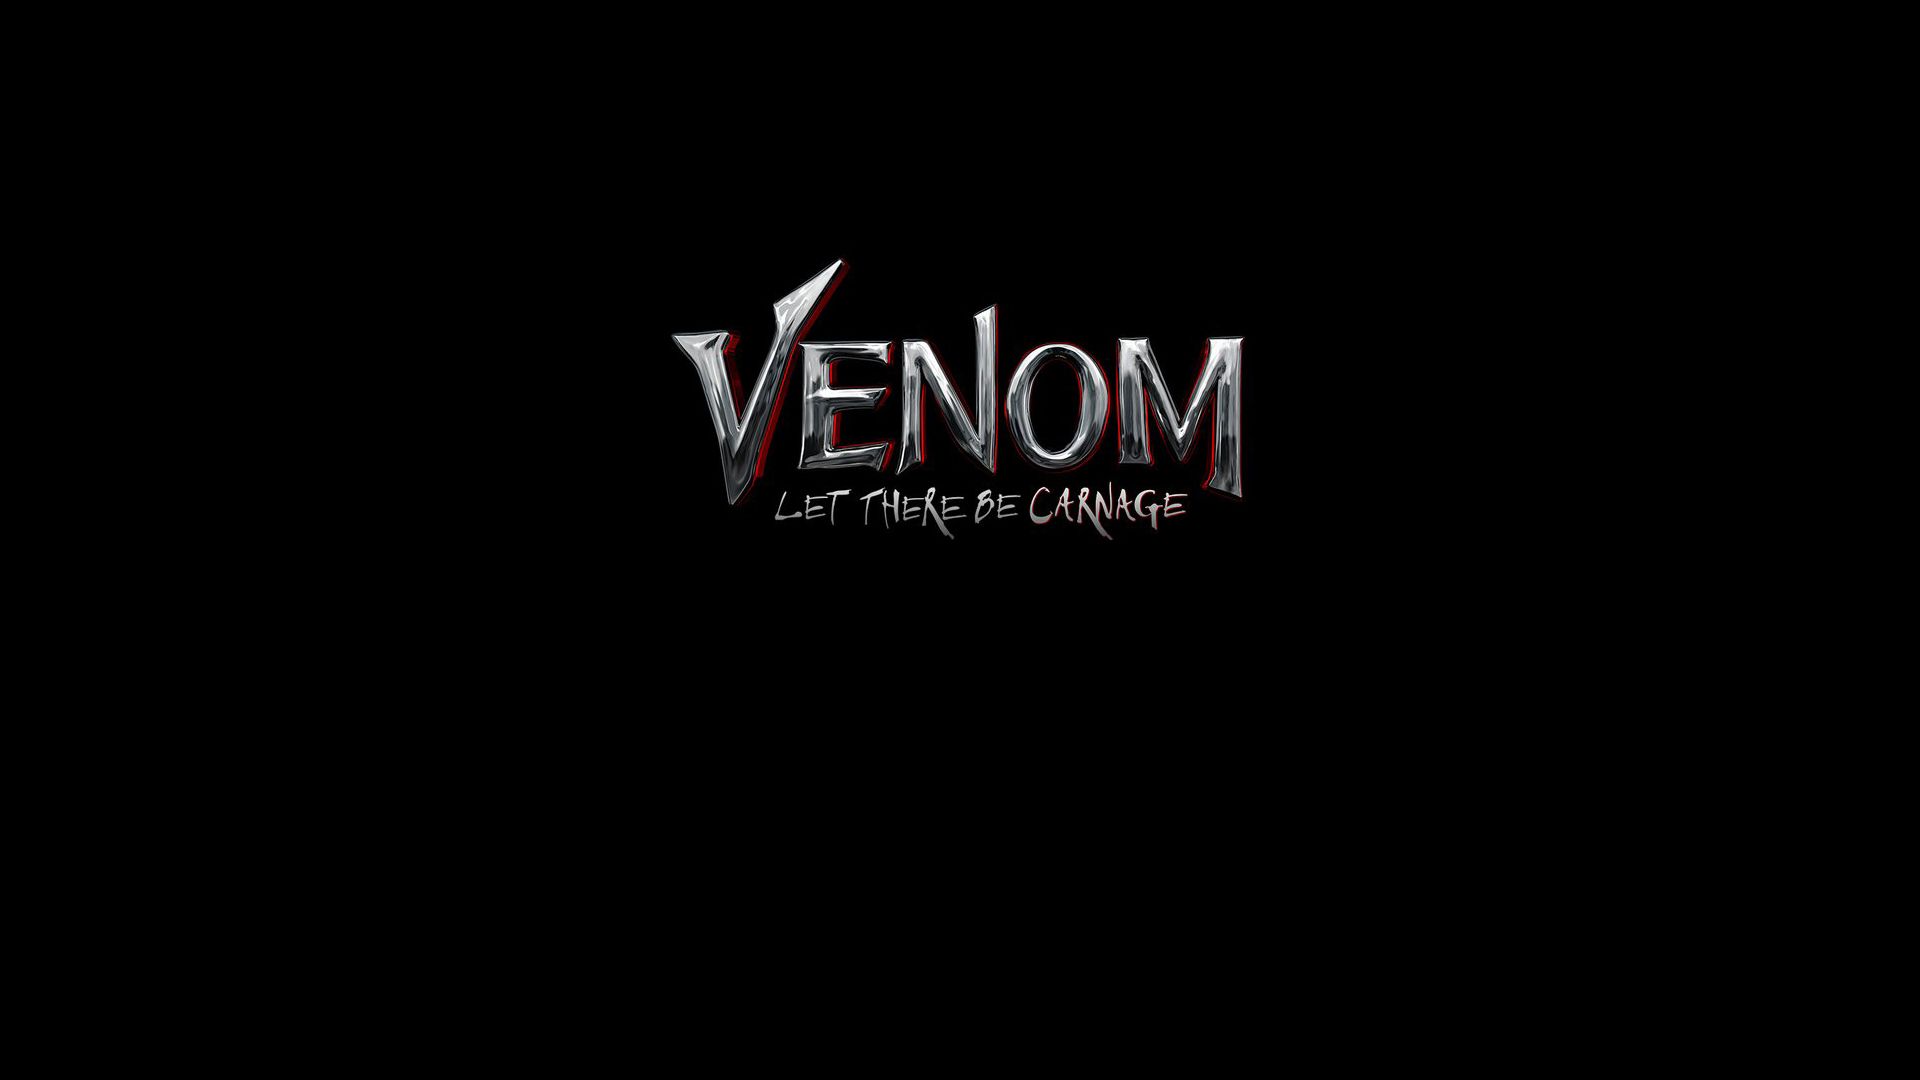 Venom 2 Let There Be Carnage Logo Wallpaper, HD Movies 4K